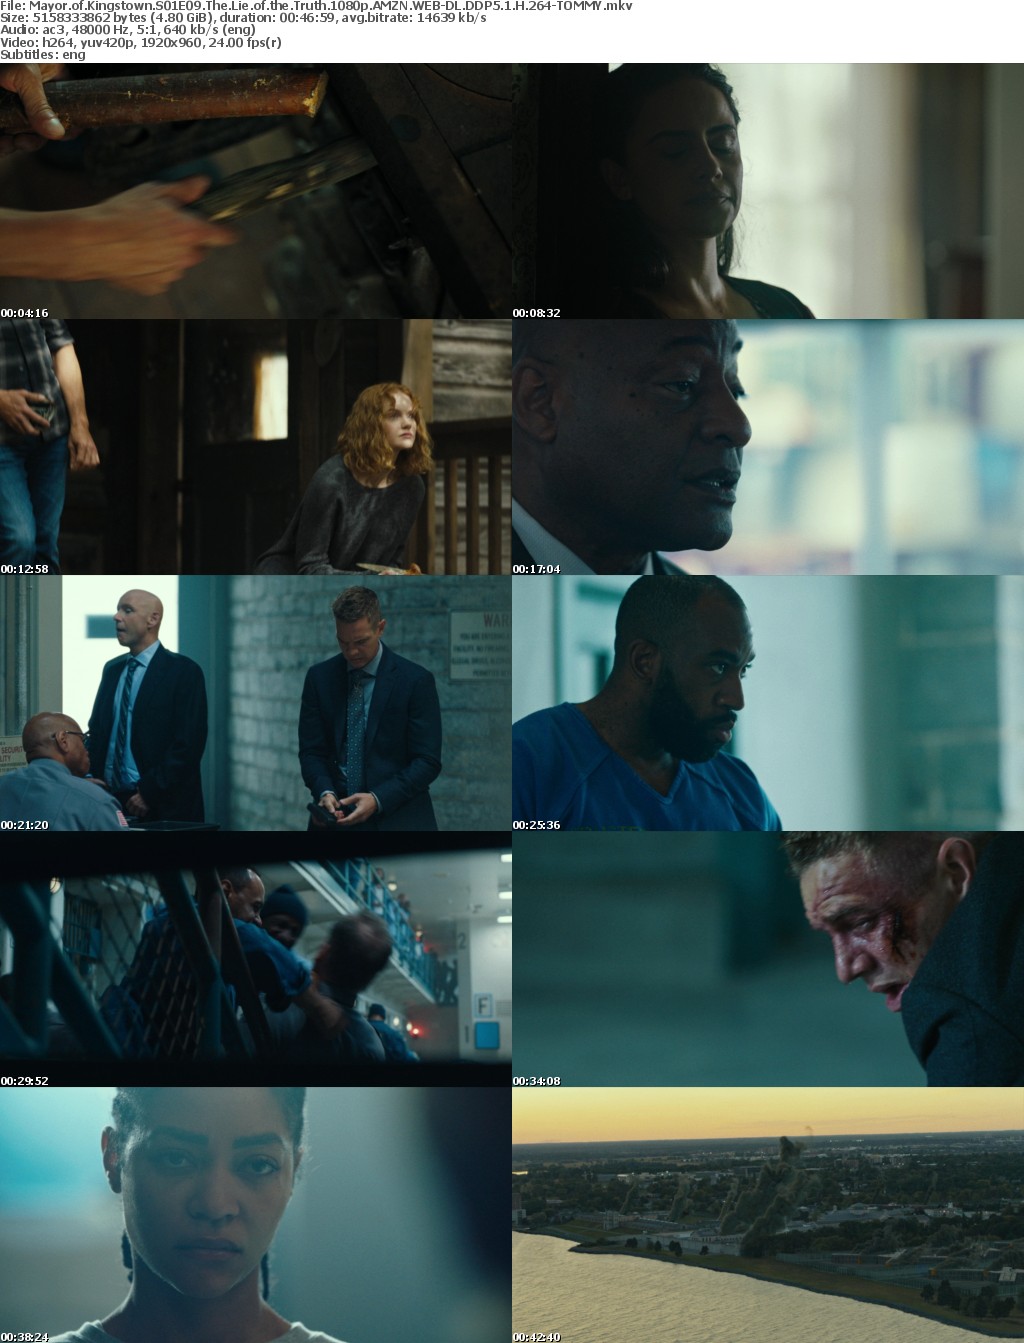 Mayor of Kingstown S01E09 The Lie of the Truth 1080p AMZN WEBRip DDP5 1 x264-TOMMY